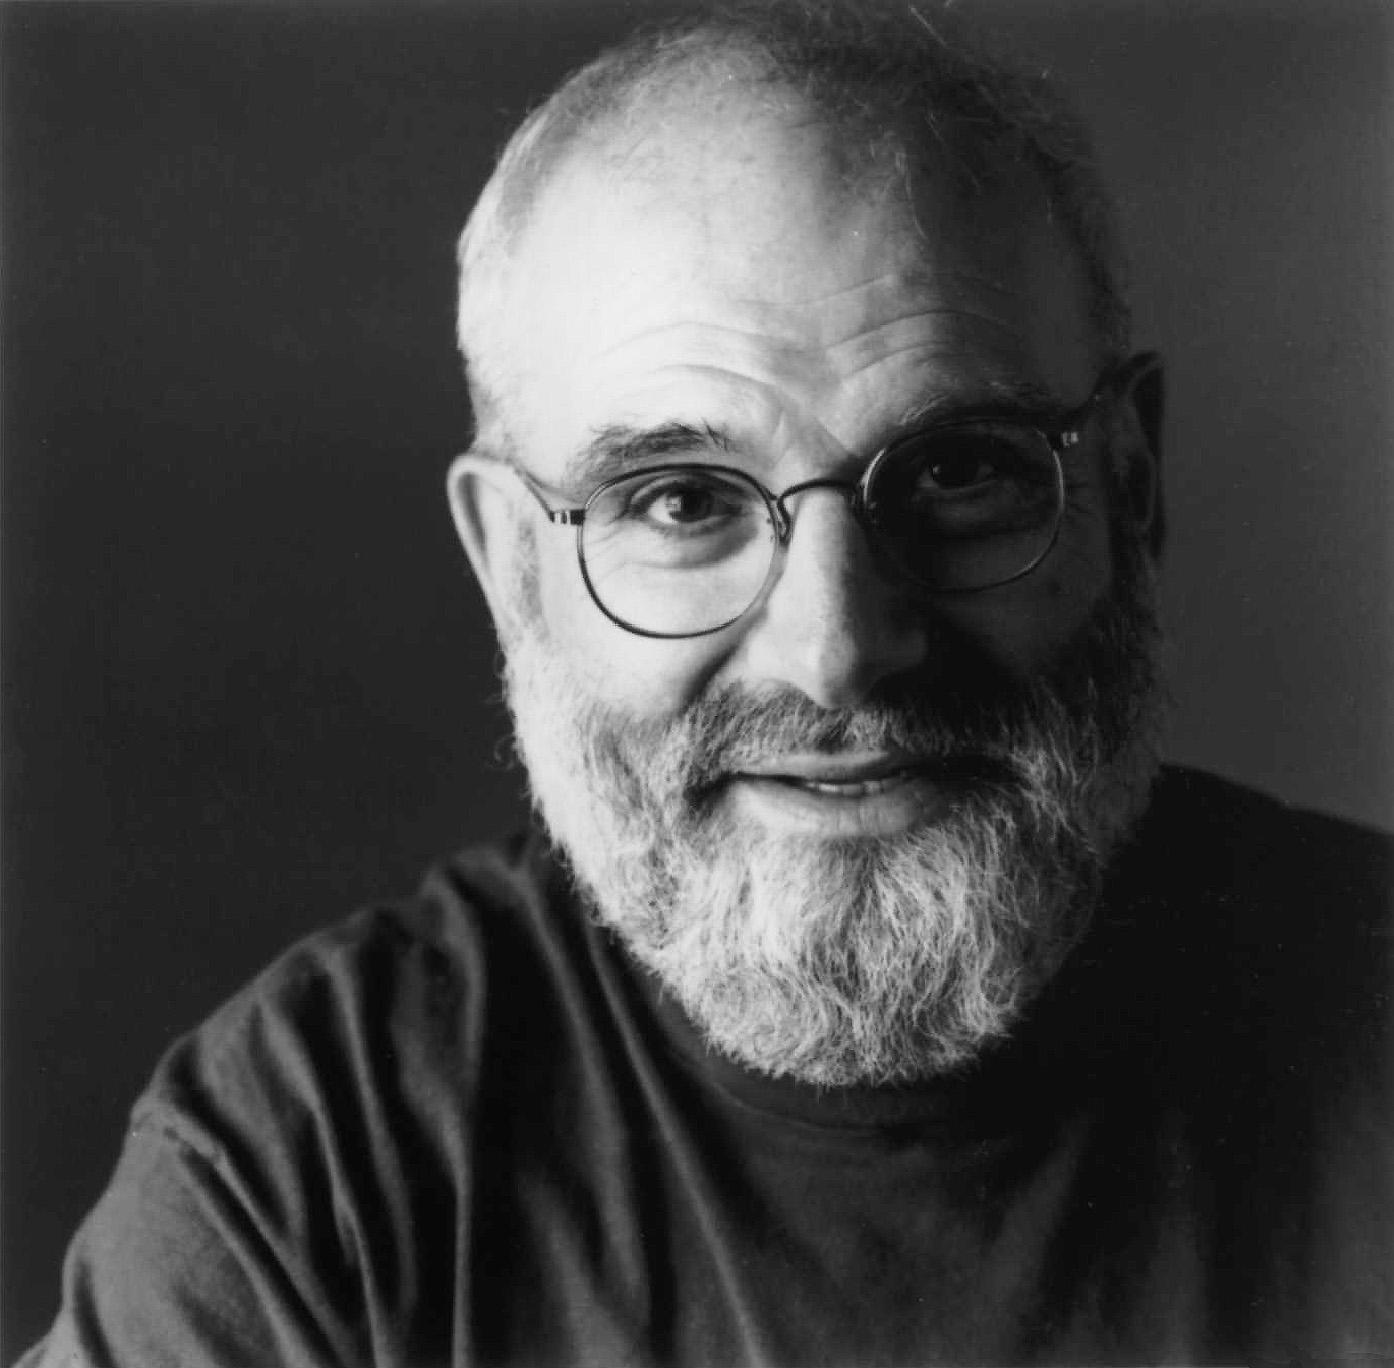 Physicians Pay Respects to Oliver Sacks's Medical Contributions, WNYC News